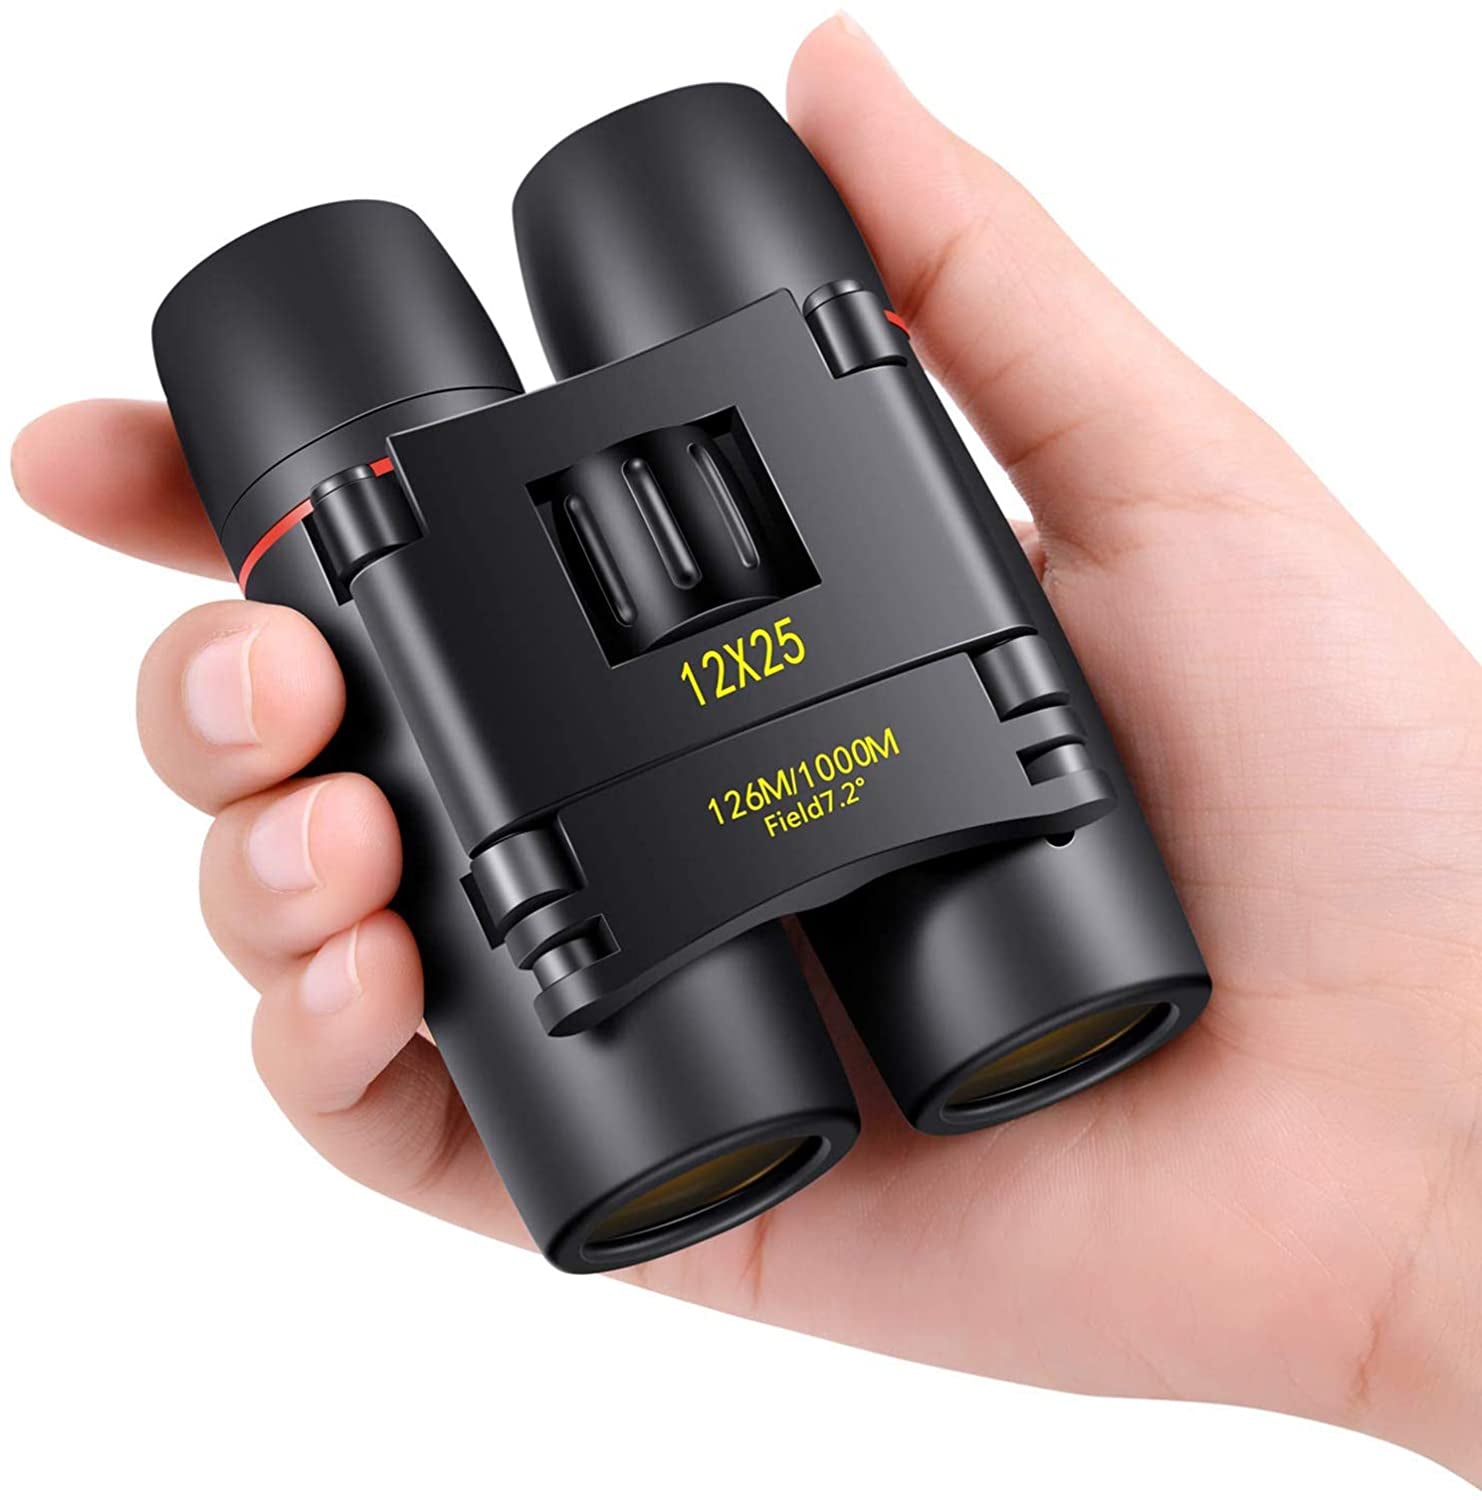 Compact 12x25 Binoculars with Clear Vision - Perfect for All